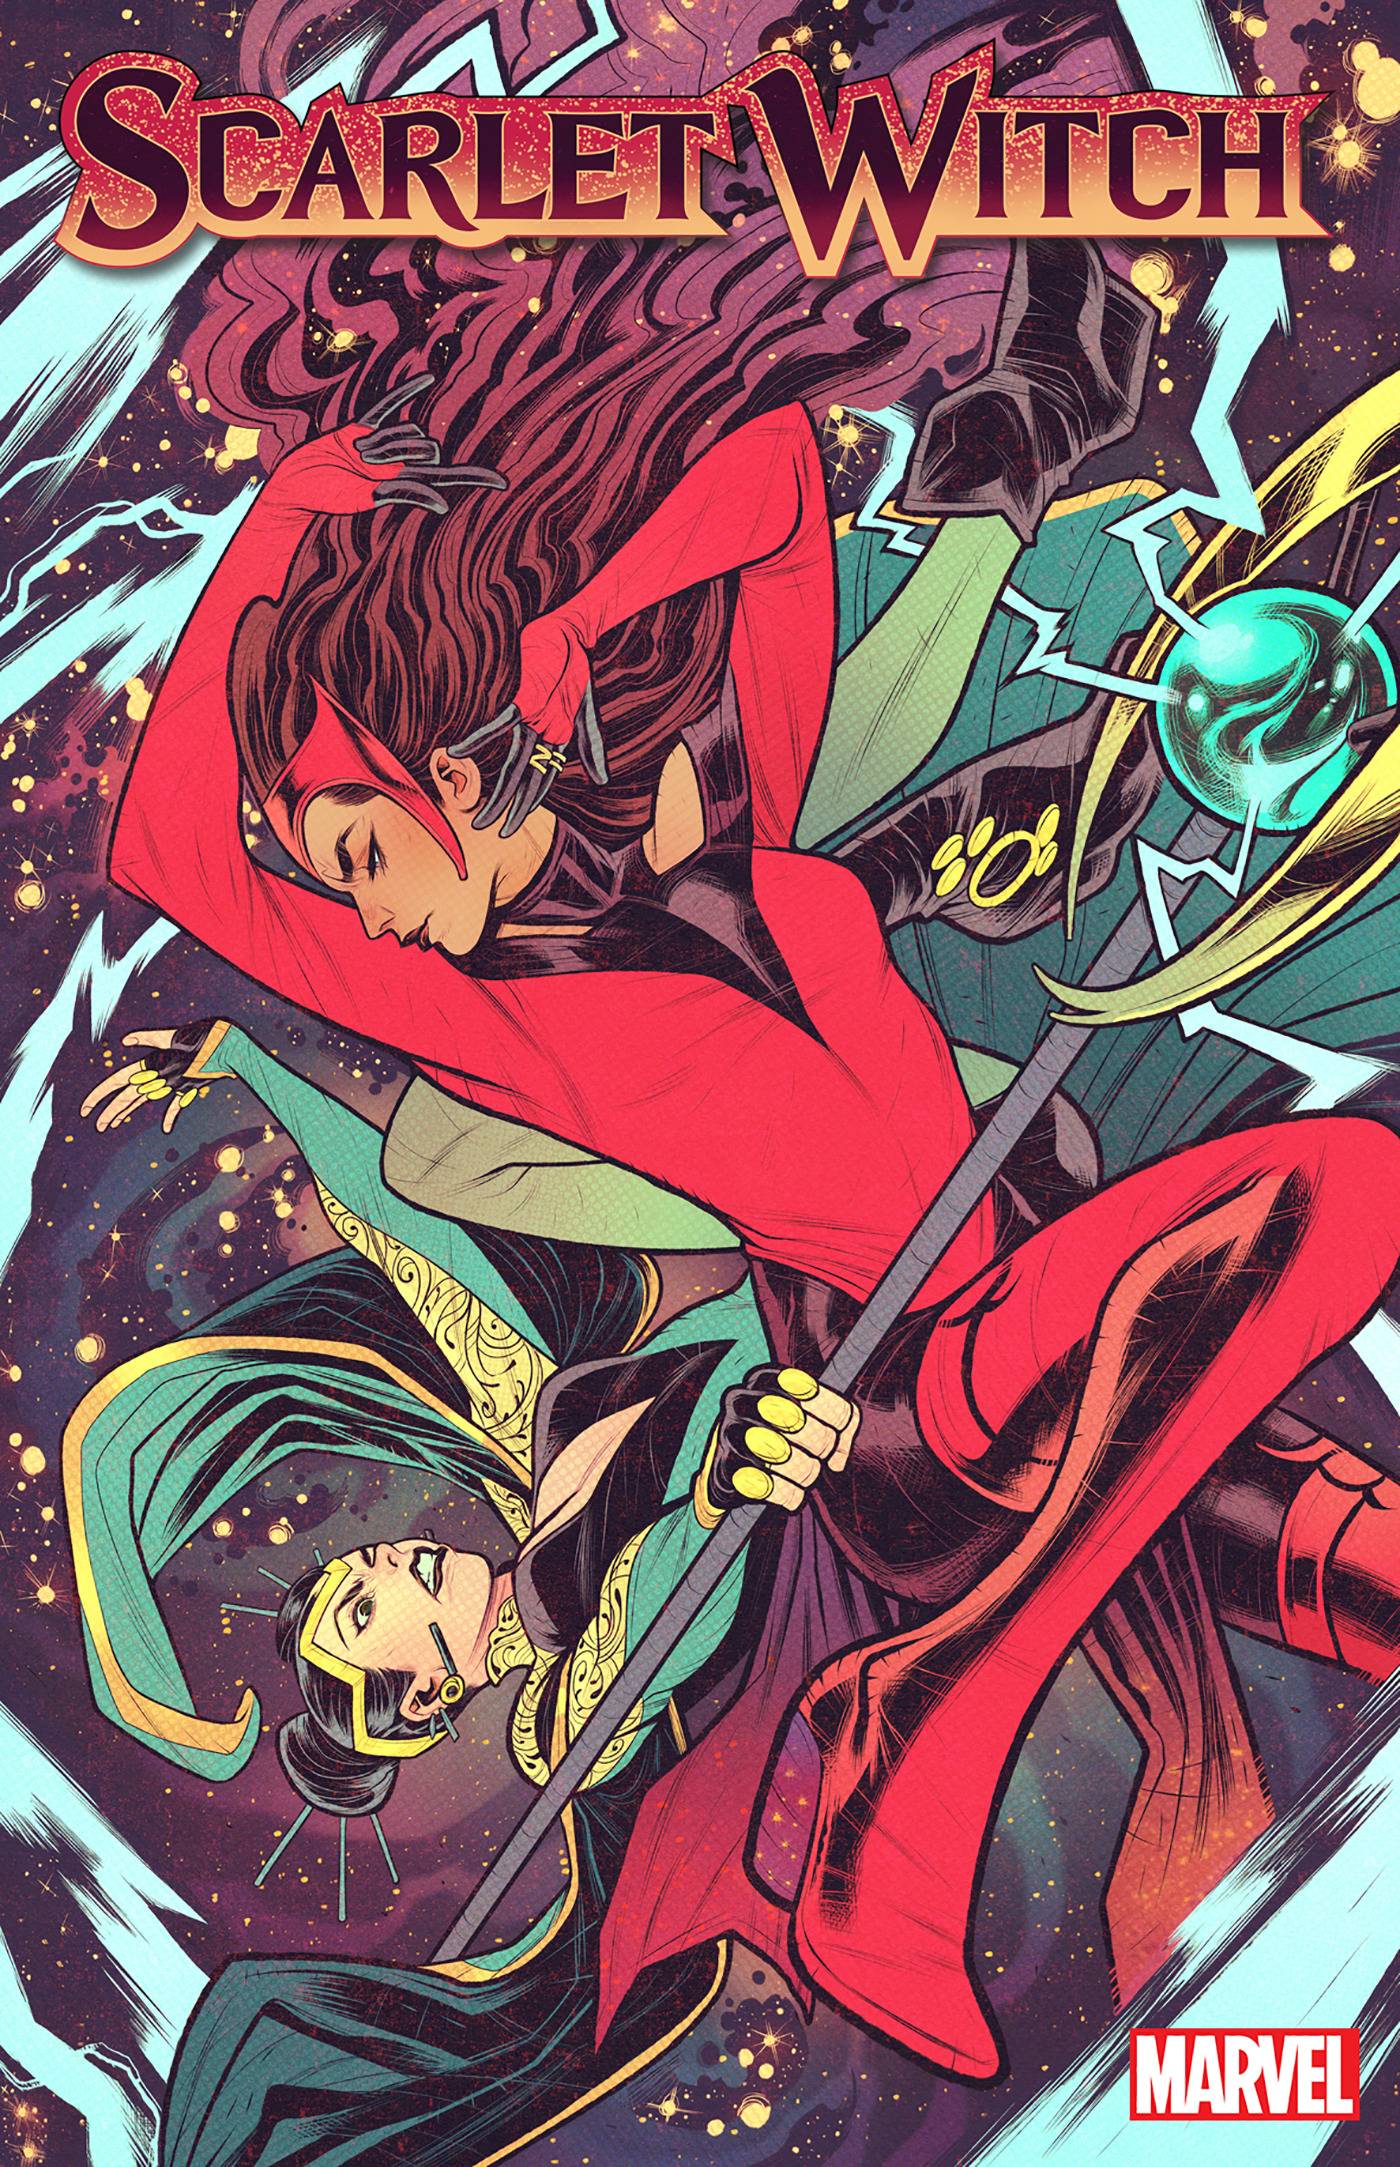 An artist plus a real big geek — Scarlet Witch - Solo comic - icons Give  credits if